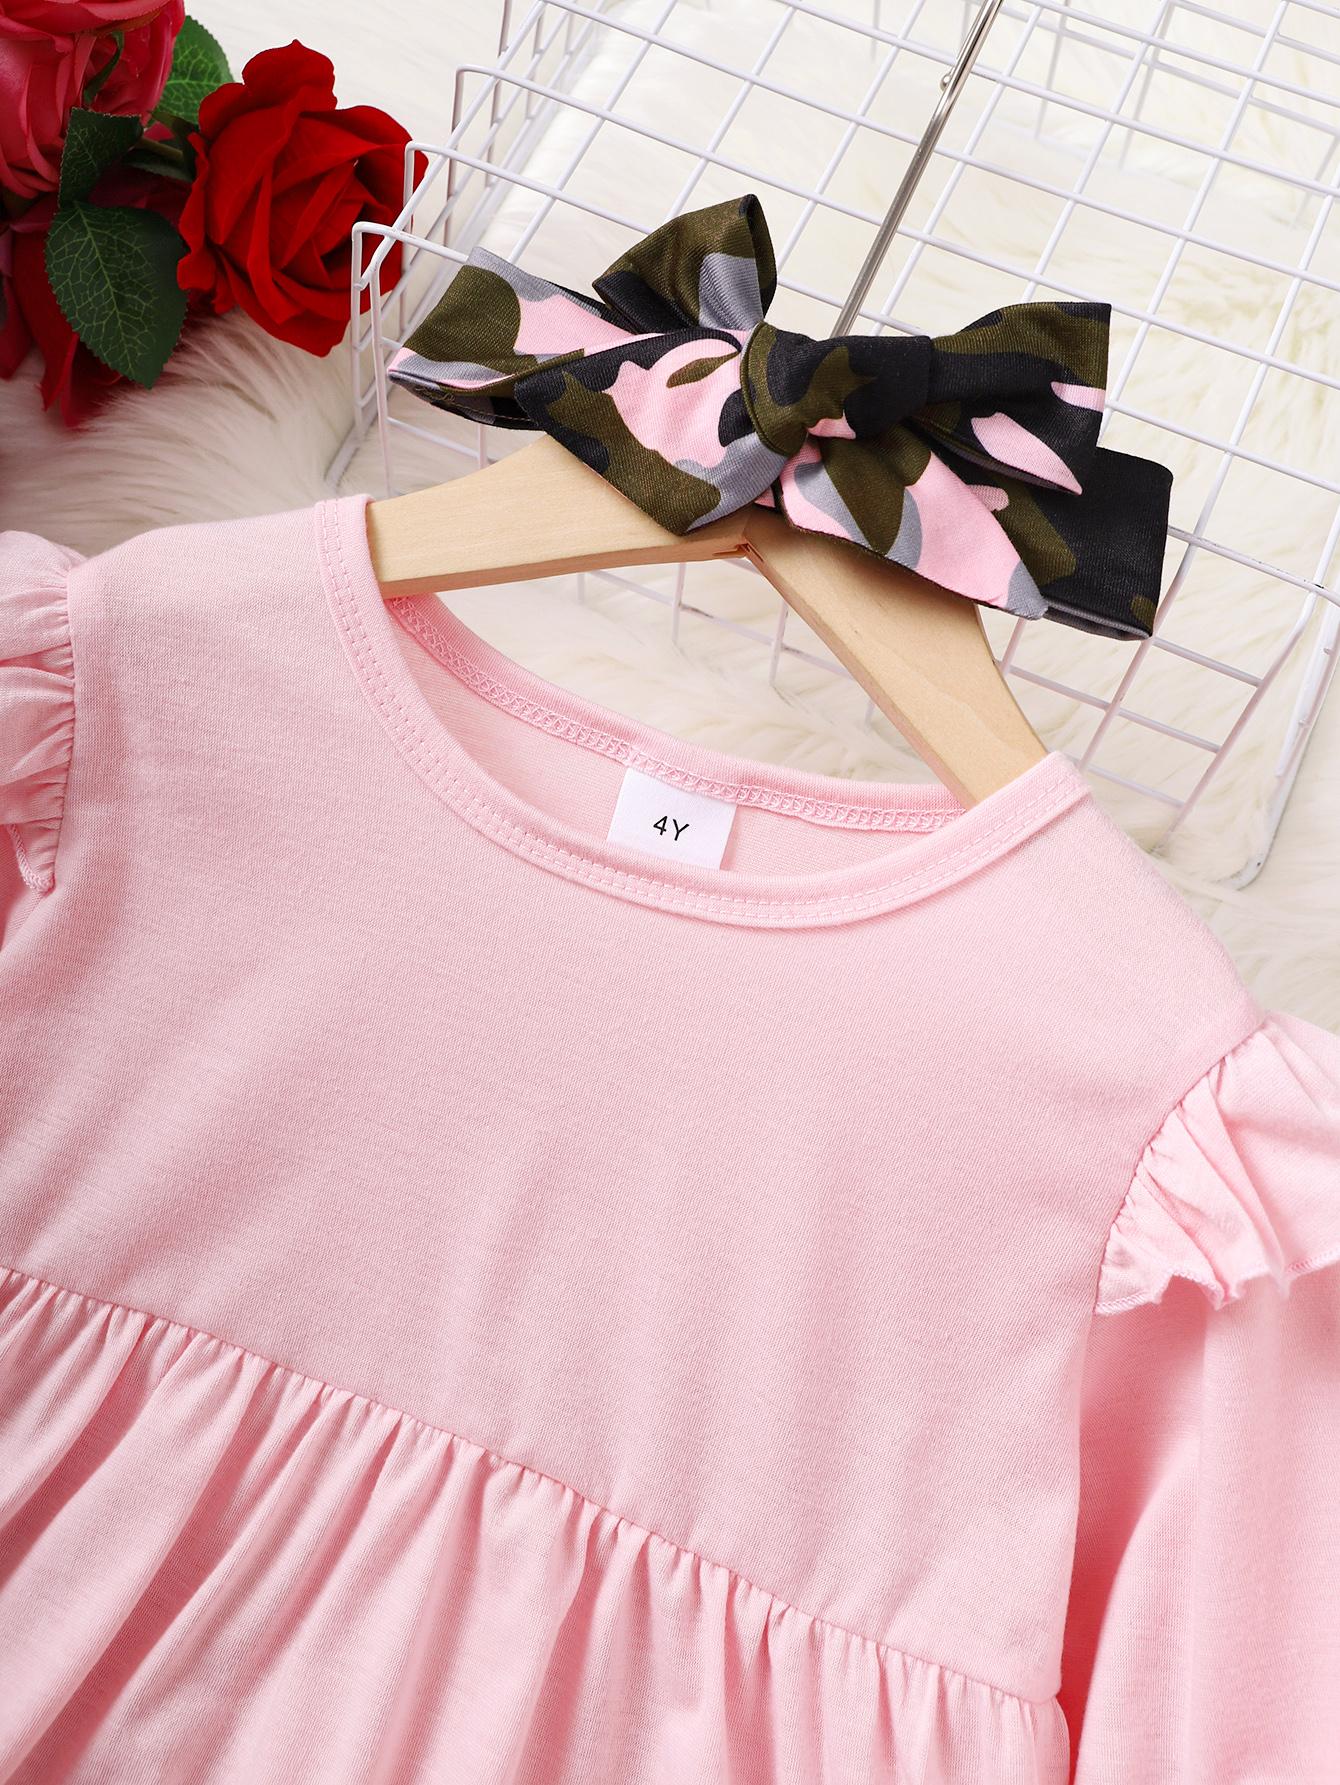 4-6Y Ready Stock Kid Girls Clothes Solid Color Ruffle Long Sleeve Dress Tops Elastic Camouflage Pants Headband 3Pcs Casual Outfit Sets Size:4-6T Pink Catpapa 462311008